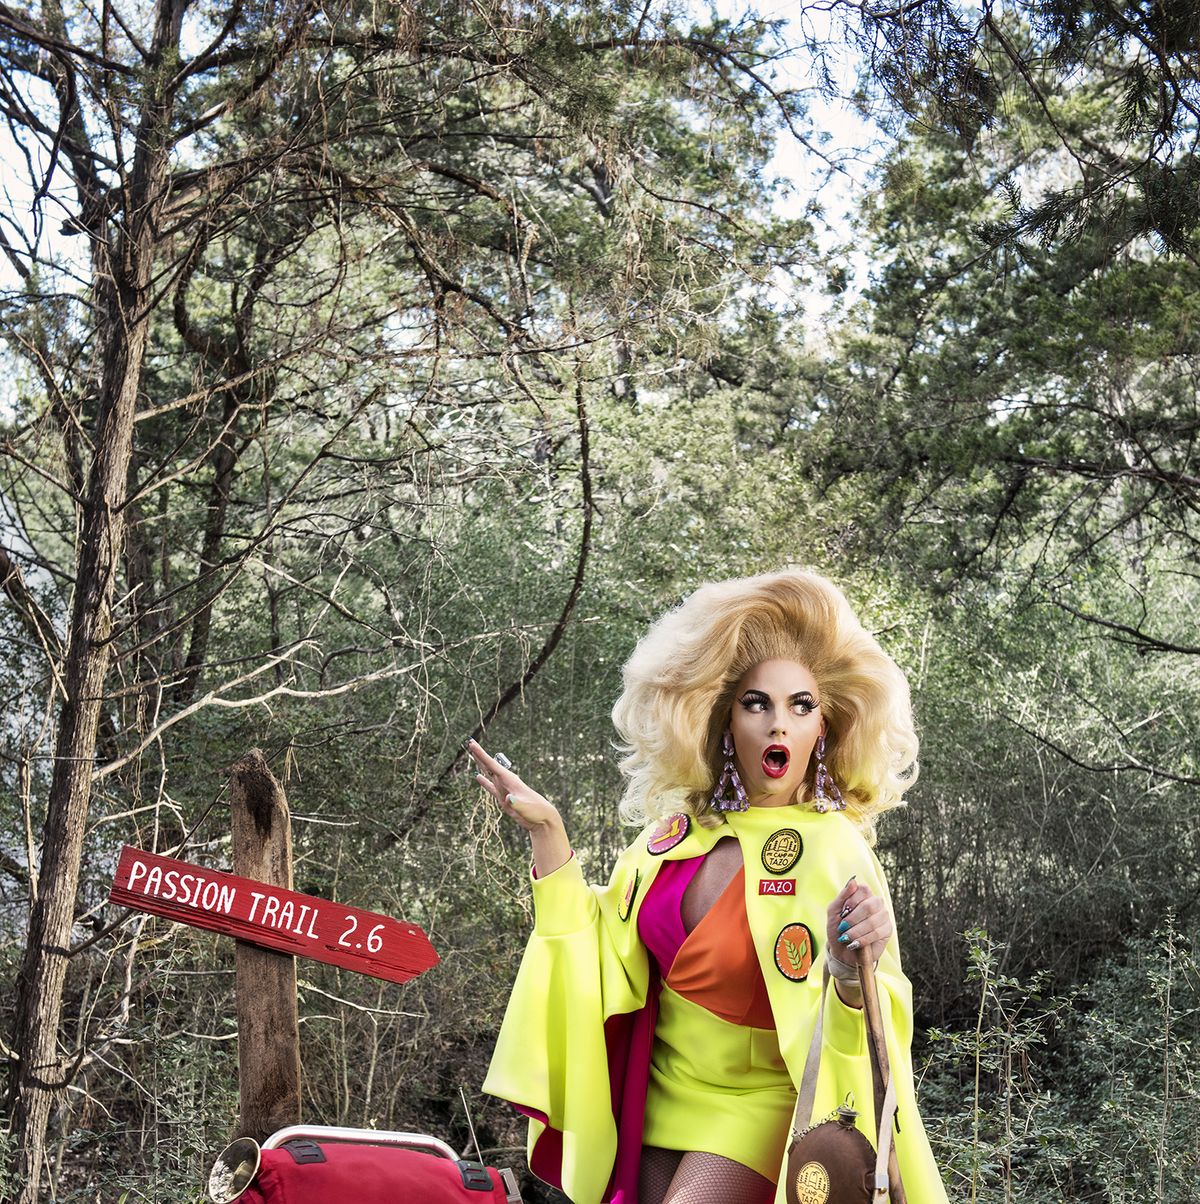 Drag superstar Alyssa Edwards (and her dance company) shines in